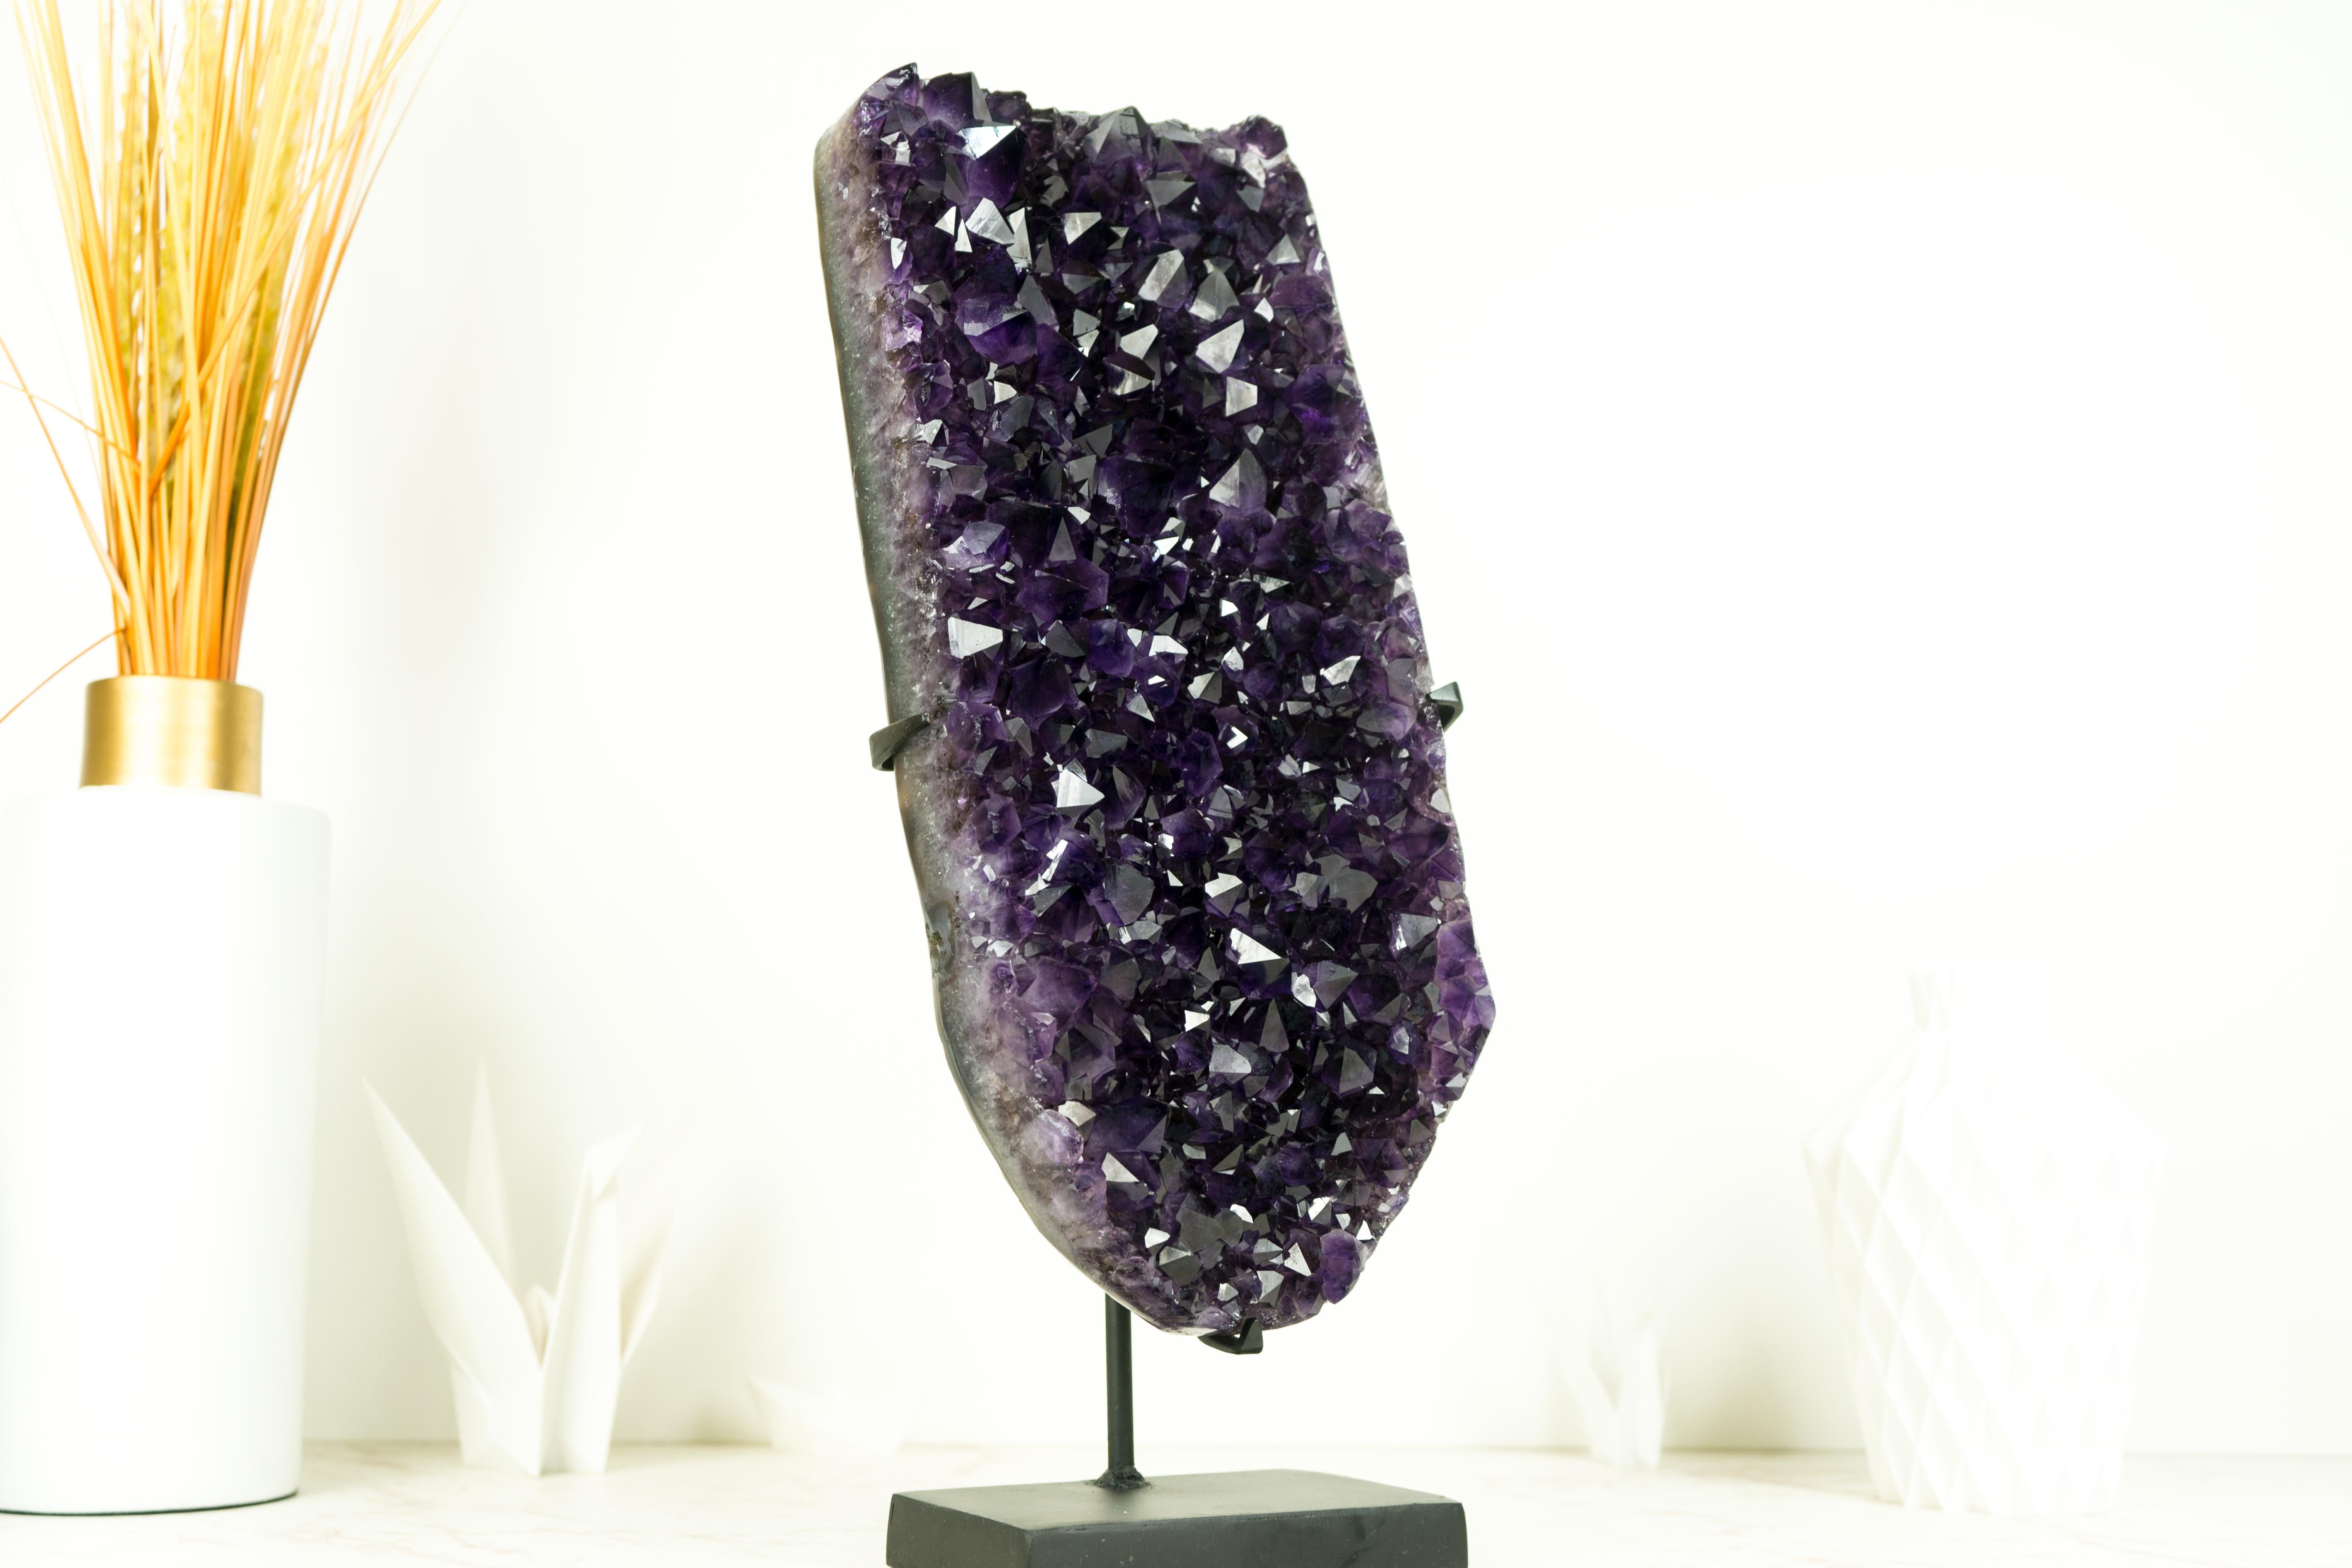 An Amethyst Cluster of exceptional beauty, this piece showcases the deepest shade of purple, AKA Grape Jelly Amethyst, on a beautifully formed Amethyst Cluster. It's a truly spectacular specimen that will elevate the space of your home, office, or